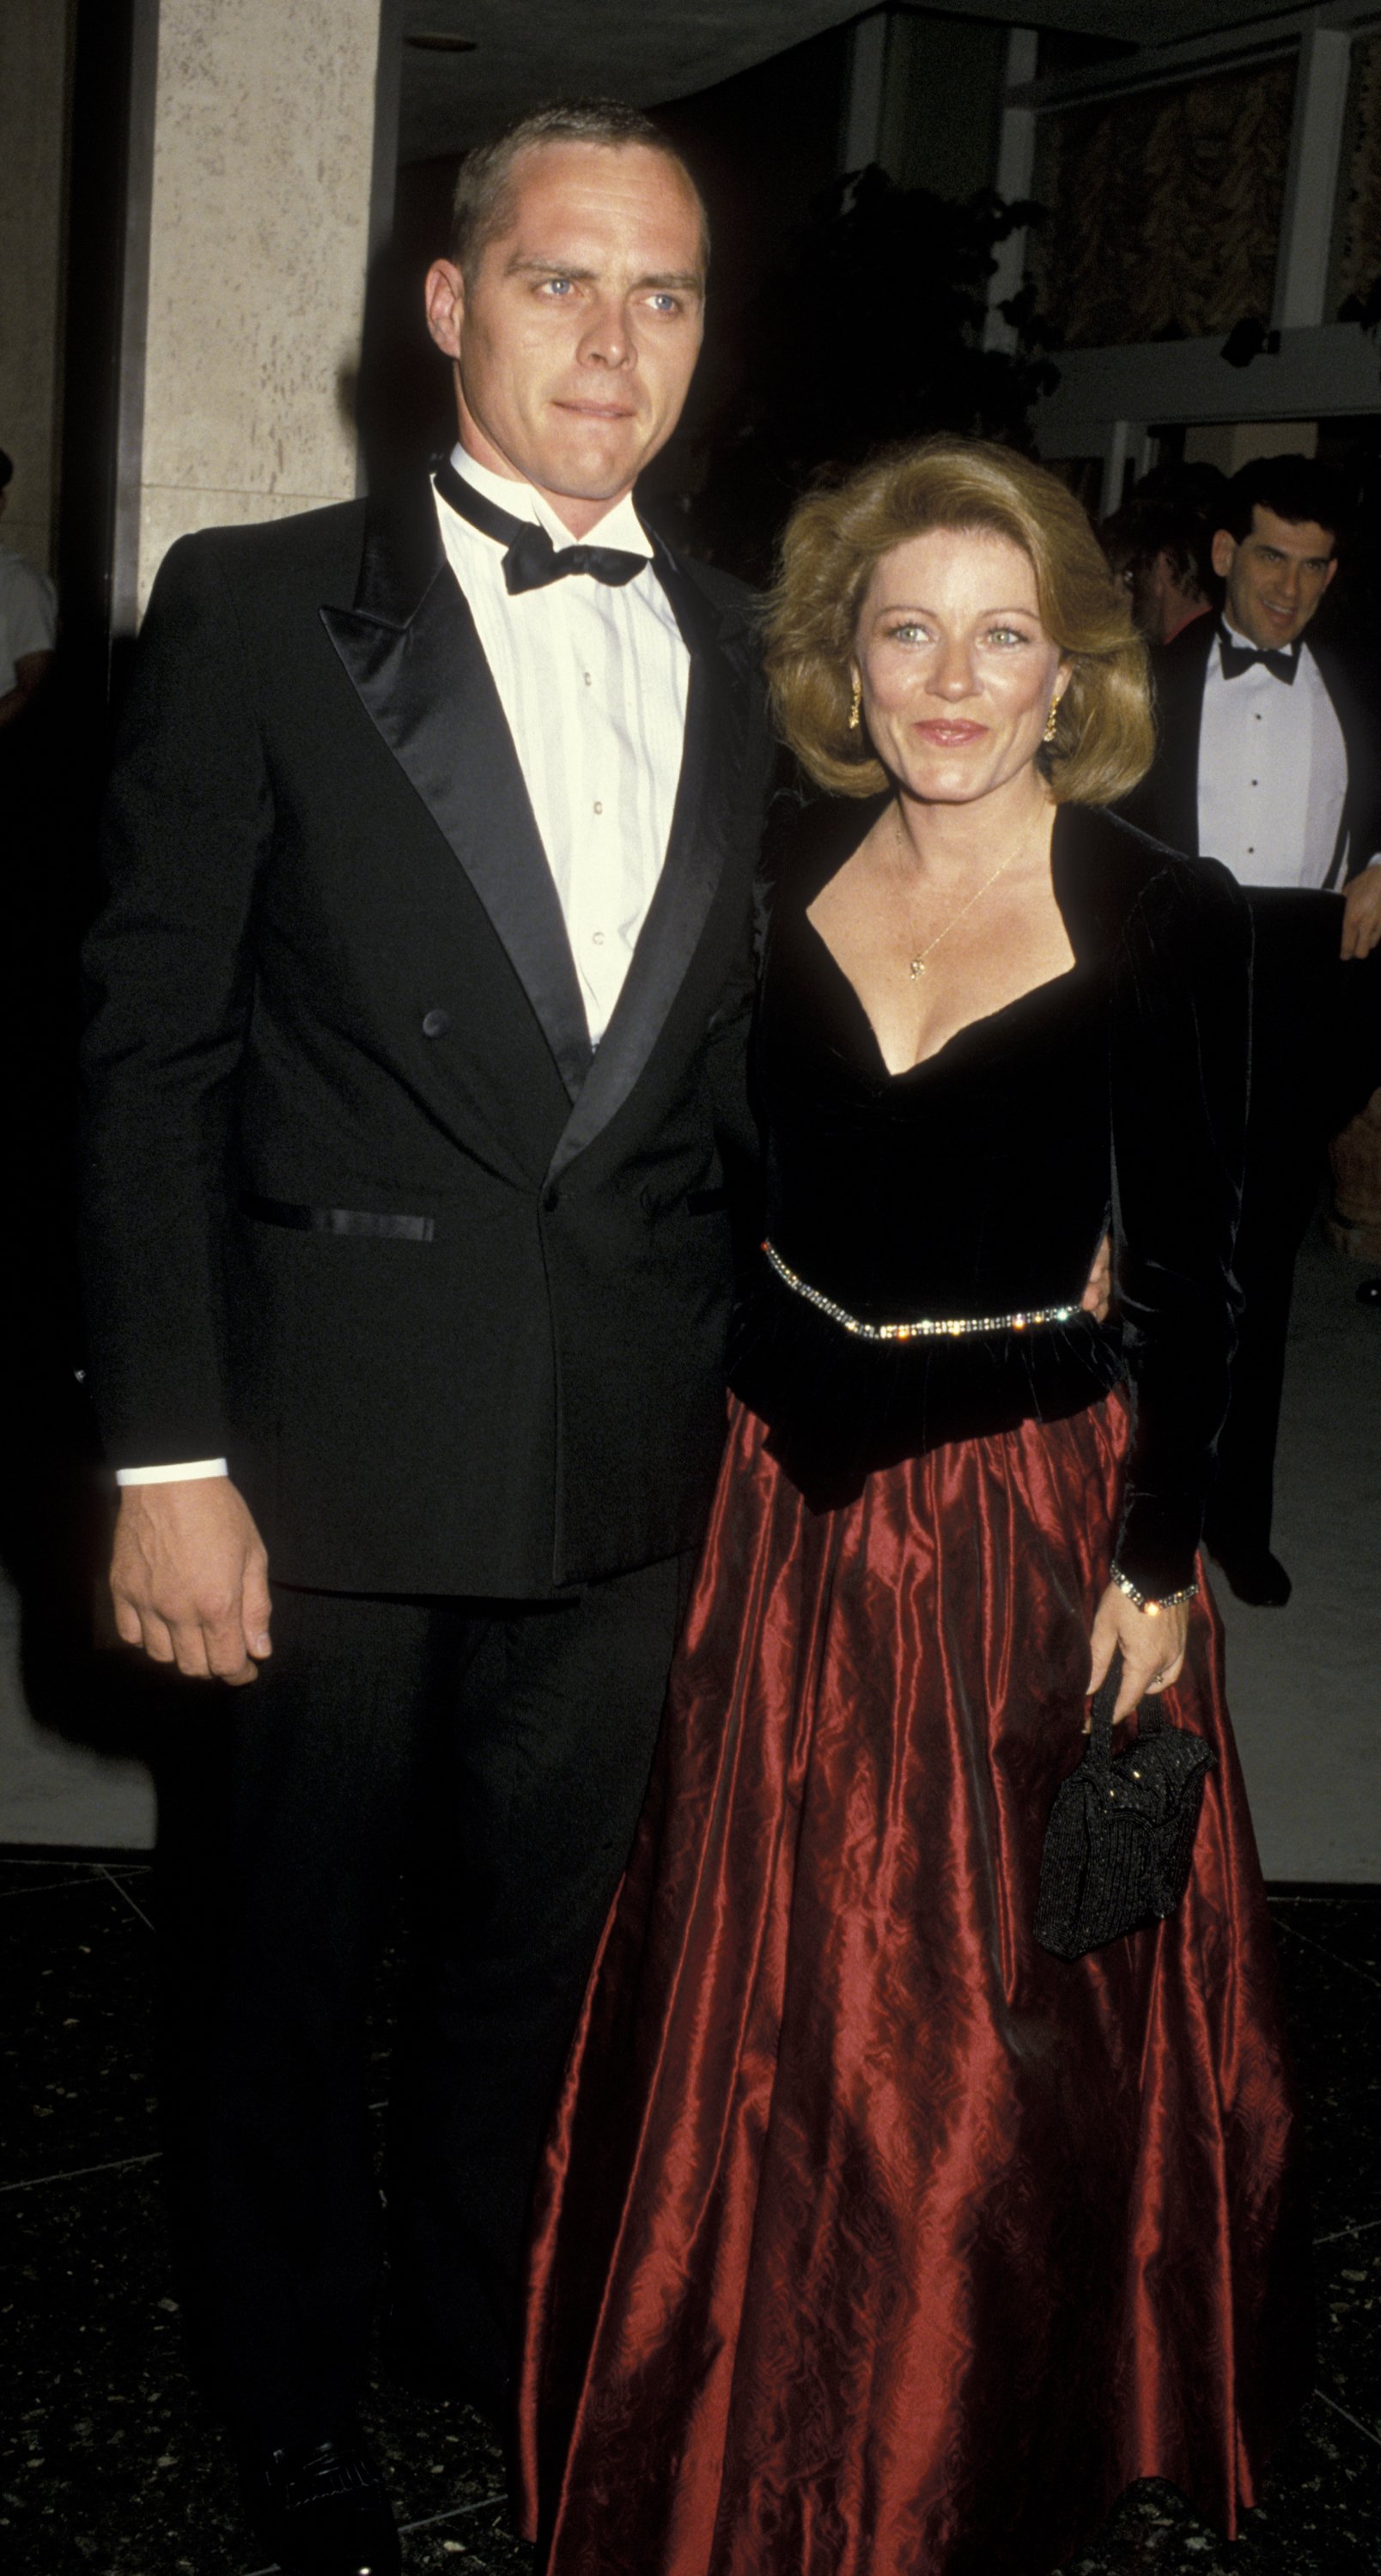 Patty Duke and Michael Pearce at the 43rd Annual Golden Globe Awards on January 24, 1986. | Source: Getty Images